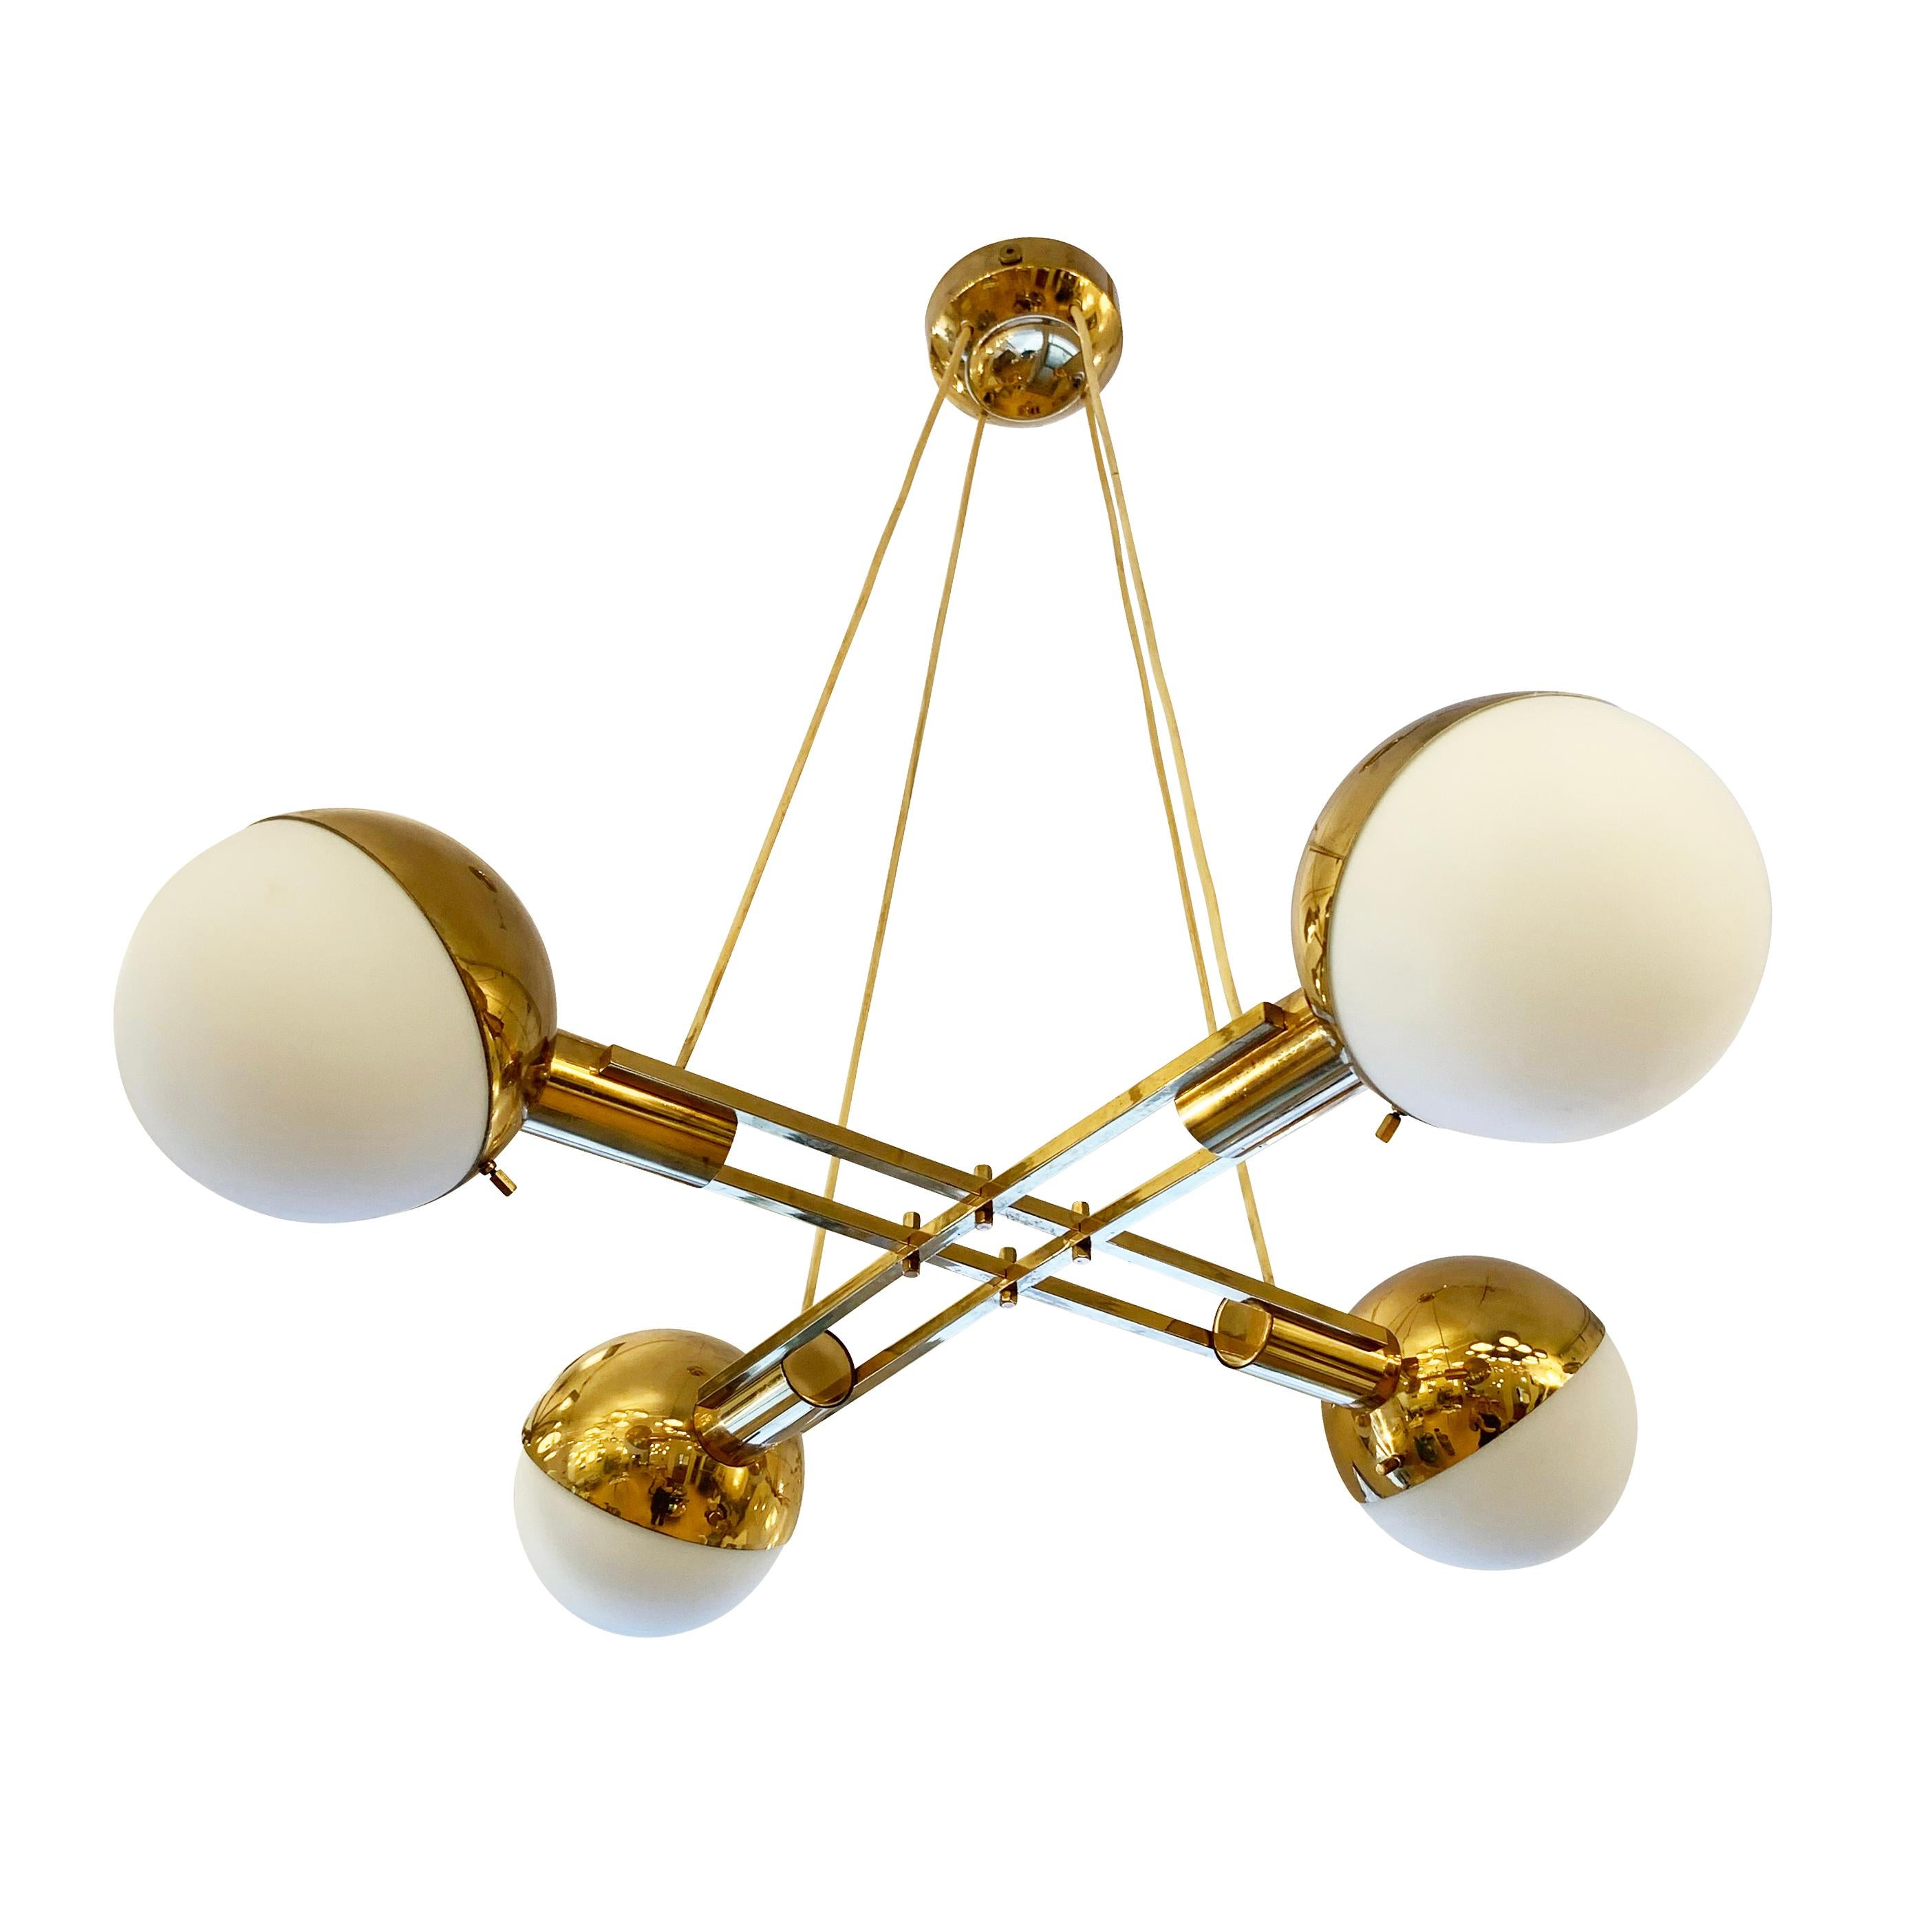 Four Globe Stilnovo Chandelier, Italy, 1960s
$7,500.00
Italian Mid-Century chandelier by Stilnovo featuring four frosted glass globes on a brass frame. Height is adjustable via the suspension cables.

Condition: Excellent vintage condition, minor